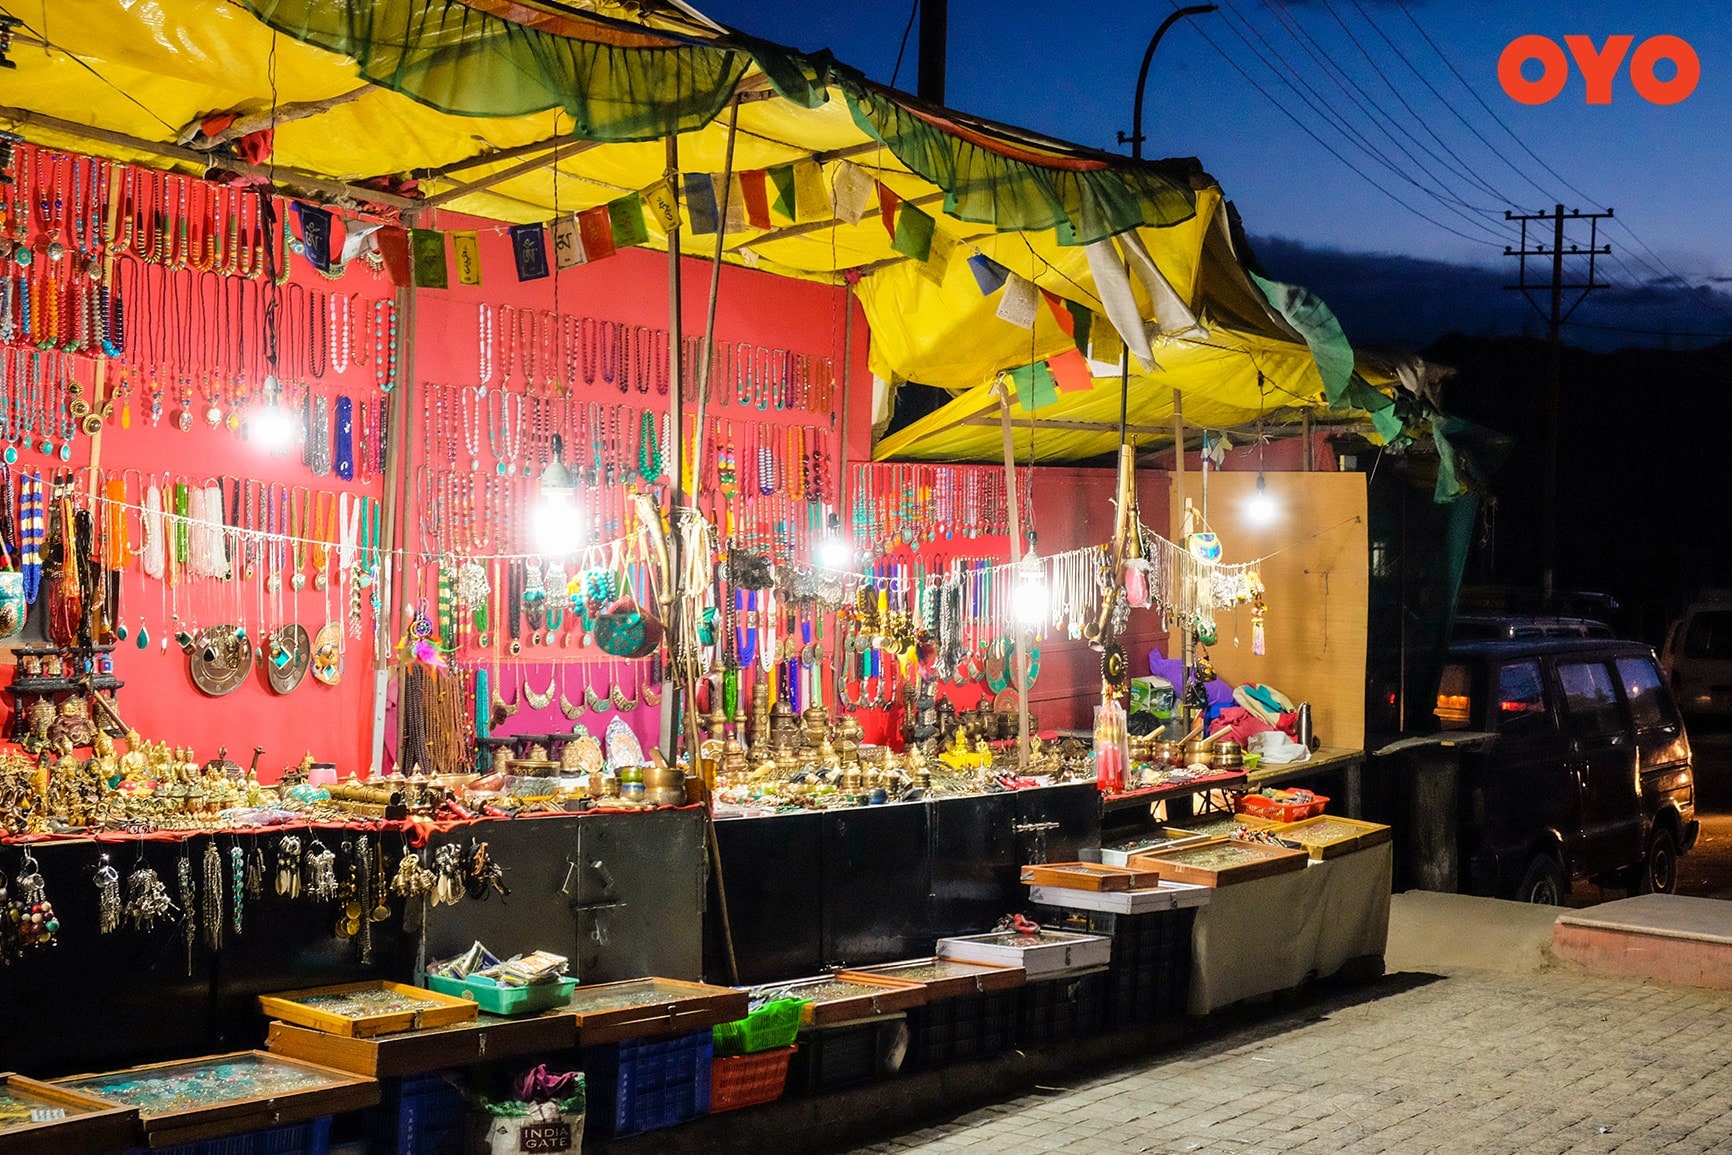 Old Manali market - place to shop in Manali